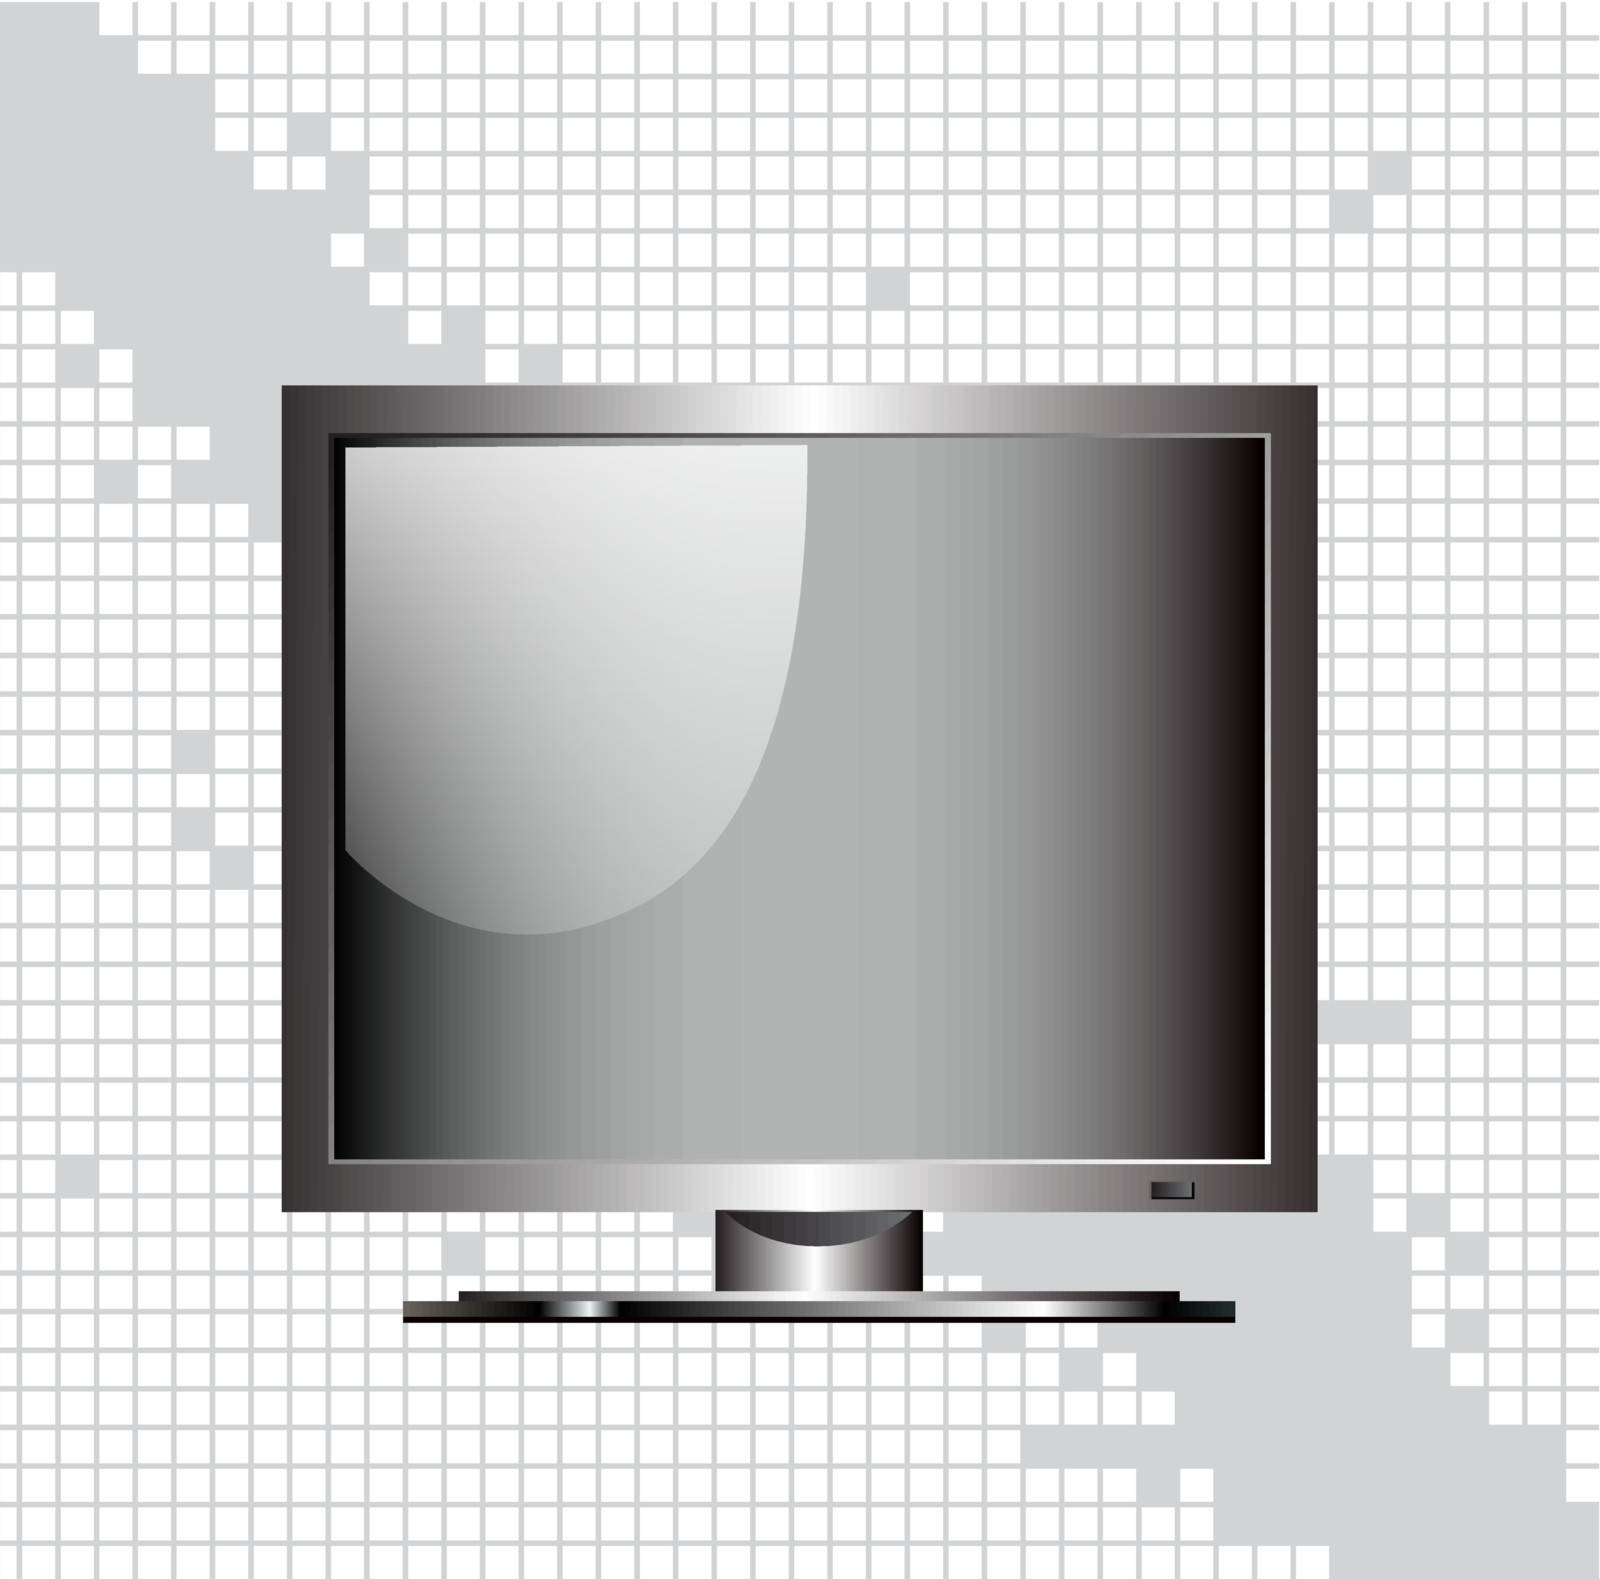 Blank monitor computer device with black screen illustration